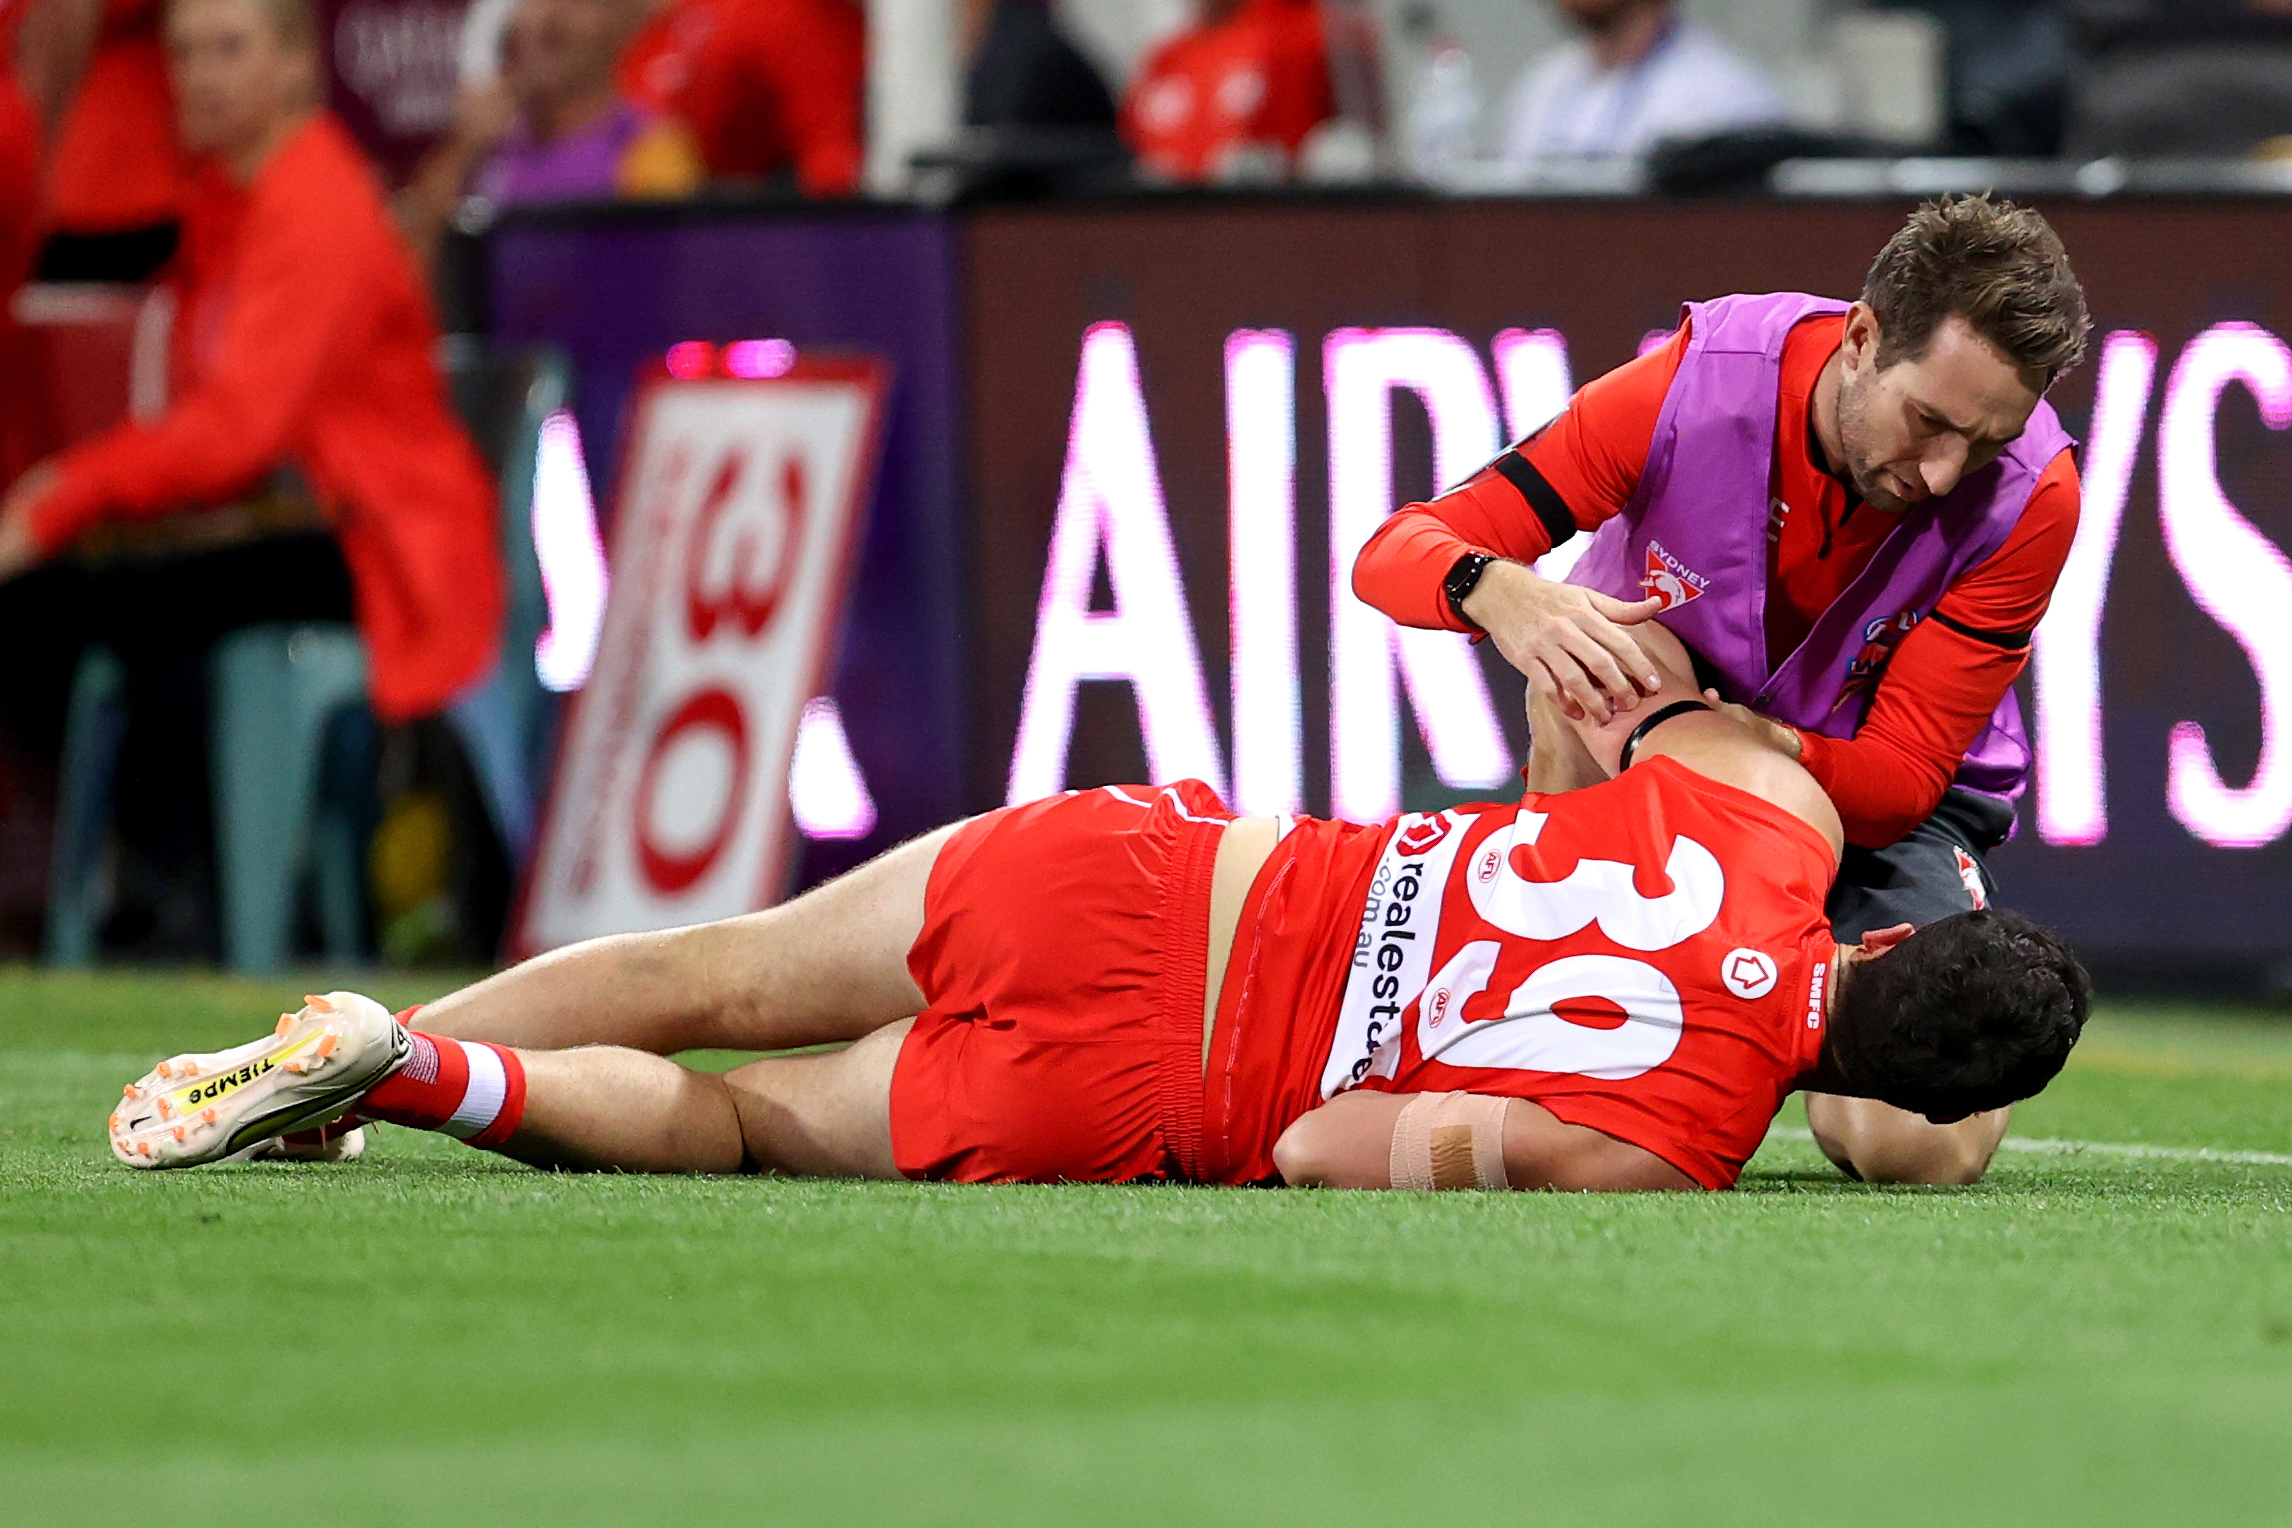 Swans star to miss rest of season after head knock